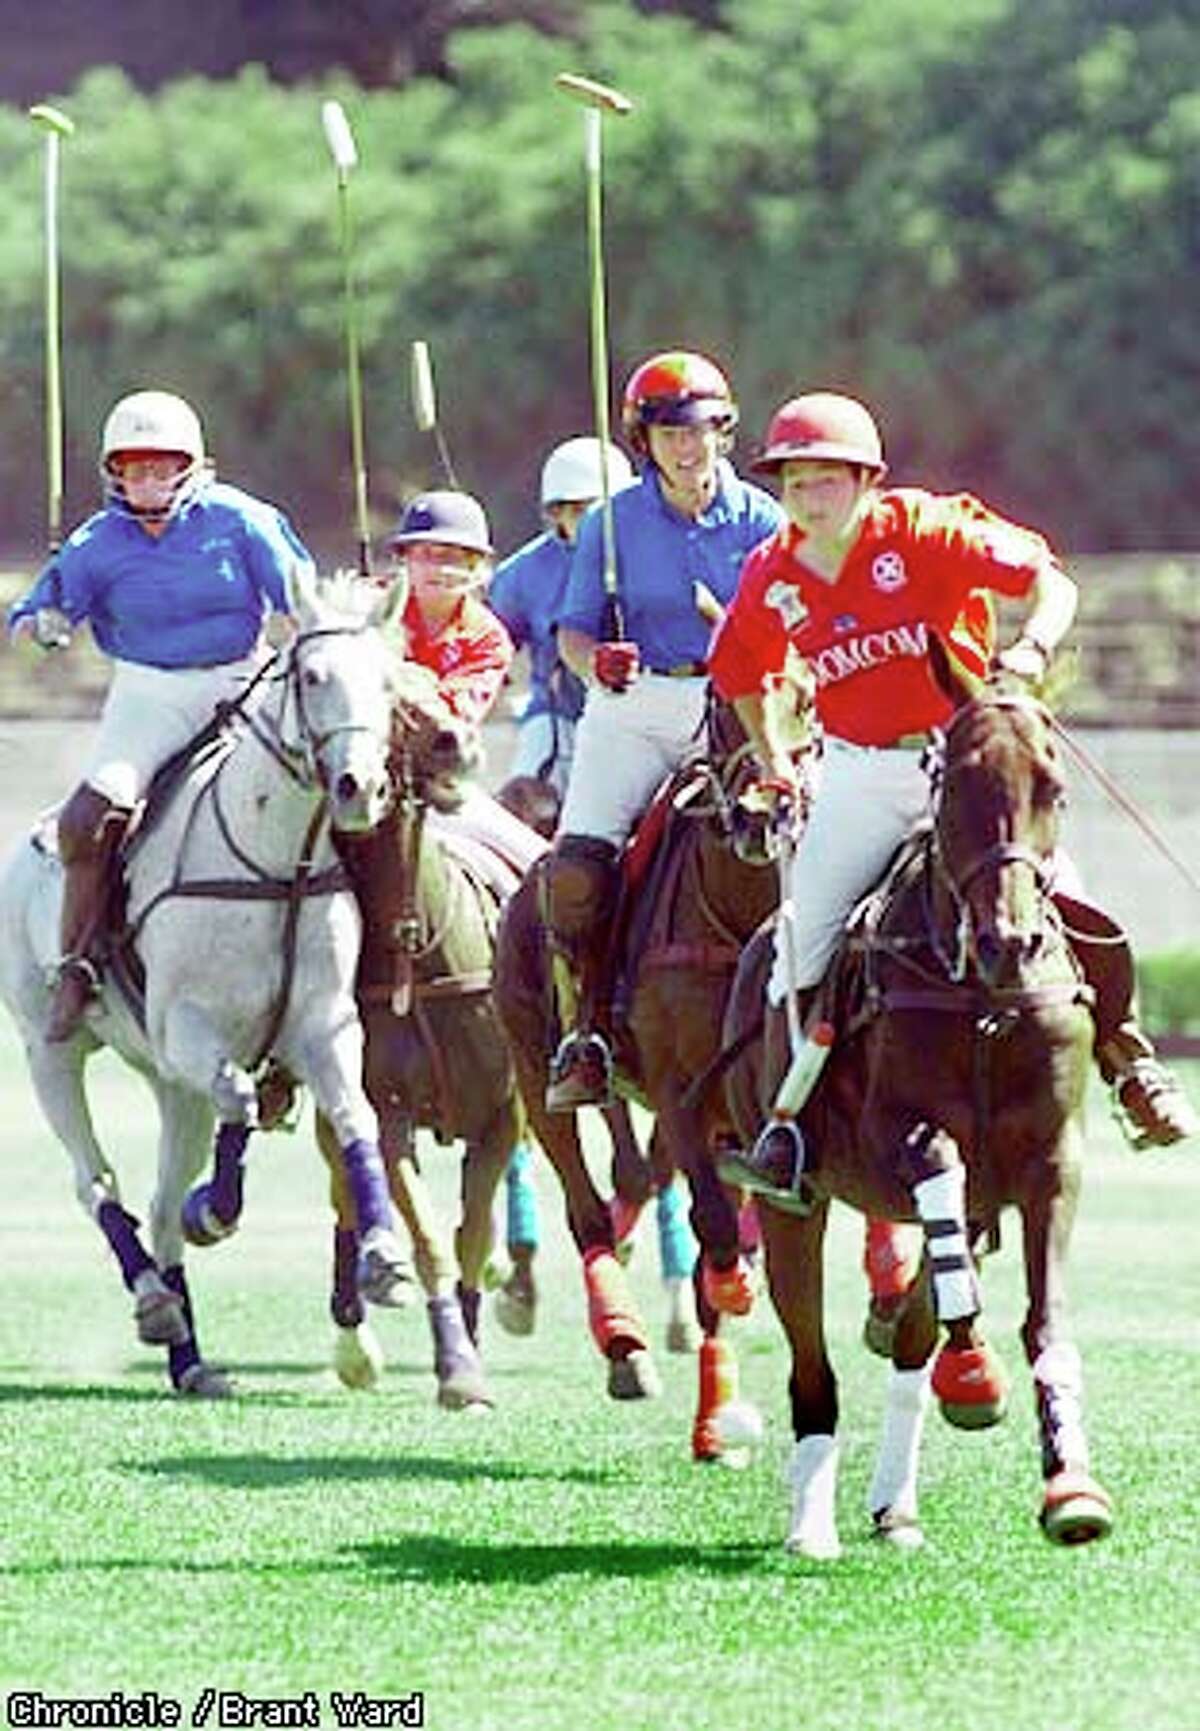 Mia di Giovani, far right, led the charge and scored most of the goals during the polo match held in Golden Gate Park. Chronicle photo by Brant Ward